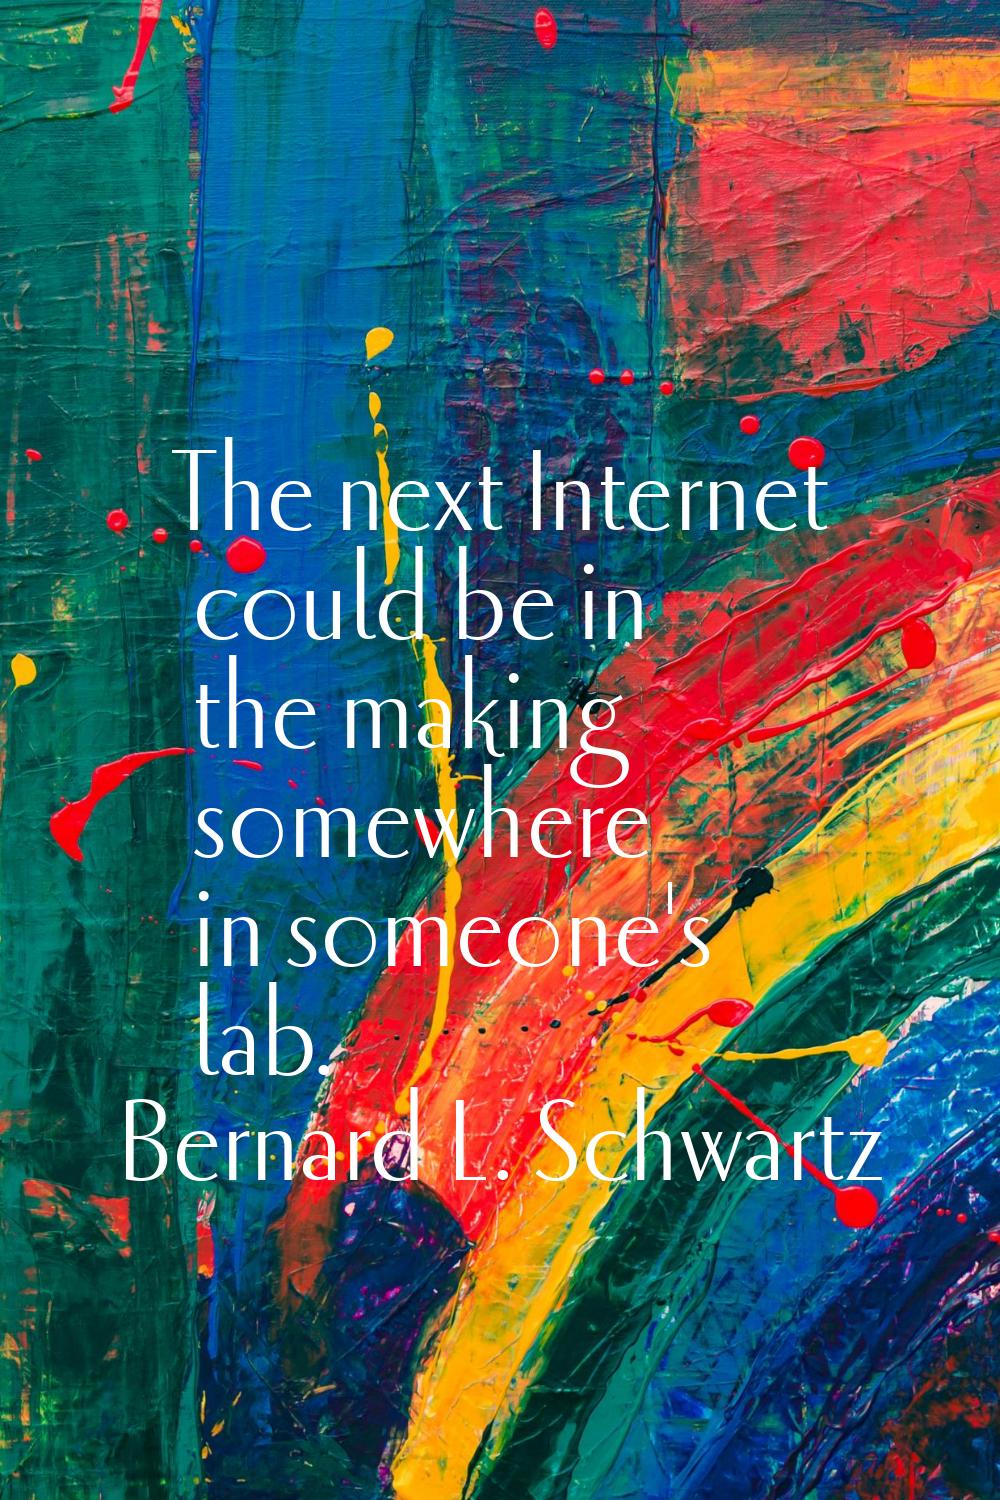 The next Internet could be in the making somewhere in someone's lab.